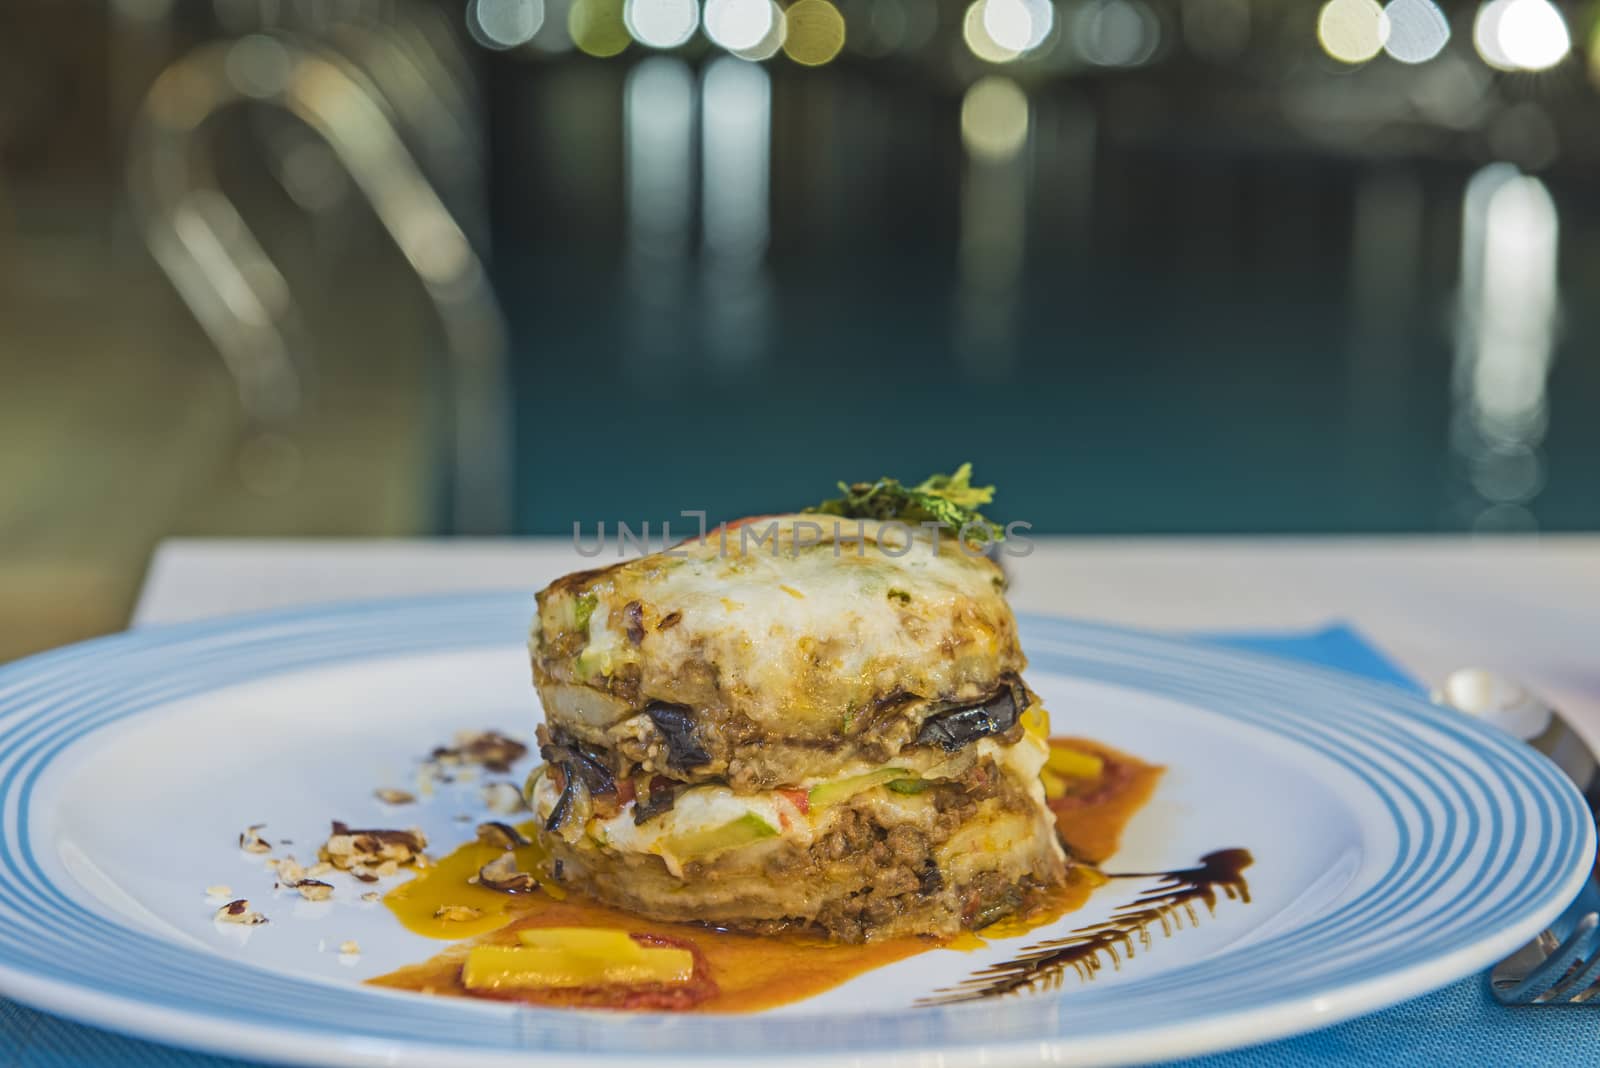 Greek moussaka a la carte meal on white plate at an outdoor restaurant by swimming pool